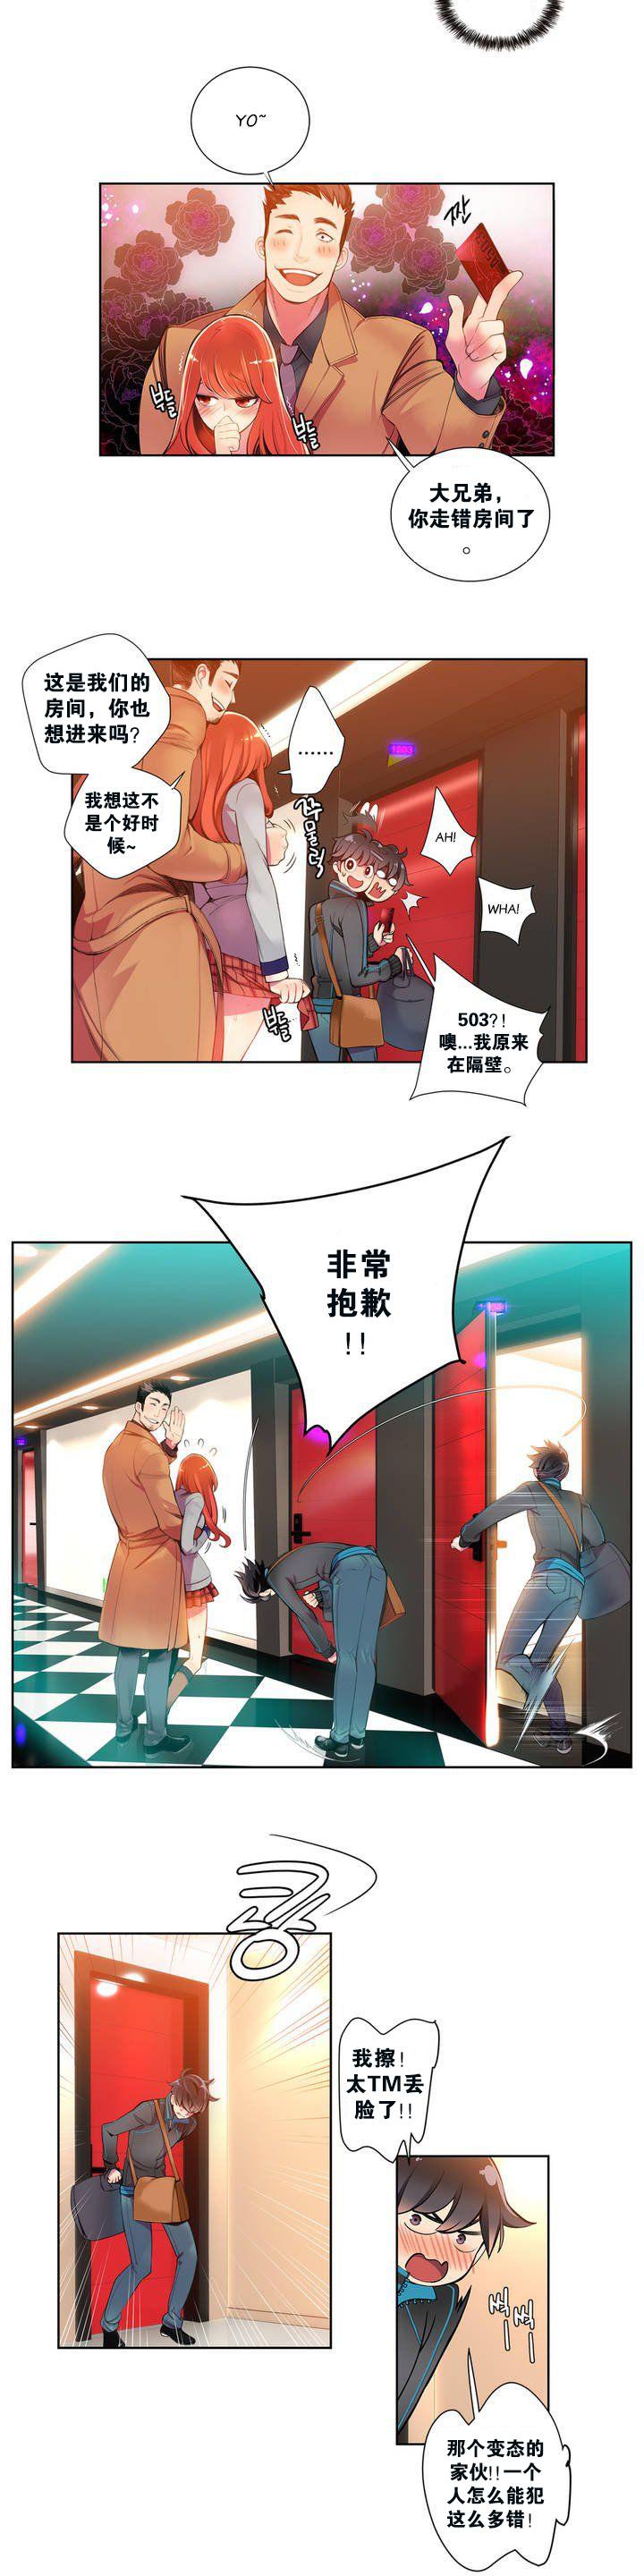 Private Sex [Juder] 莉莉丝的脐带(Lilith`s Cord) Ch.1-23 [Chinese] Masterbation - Page 12